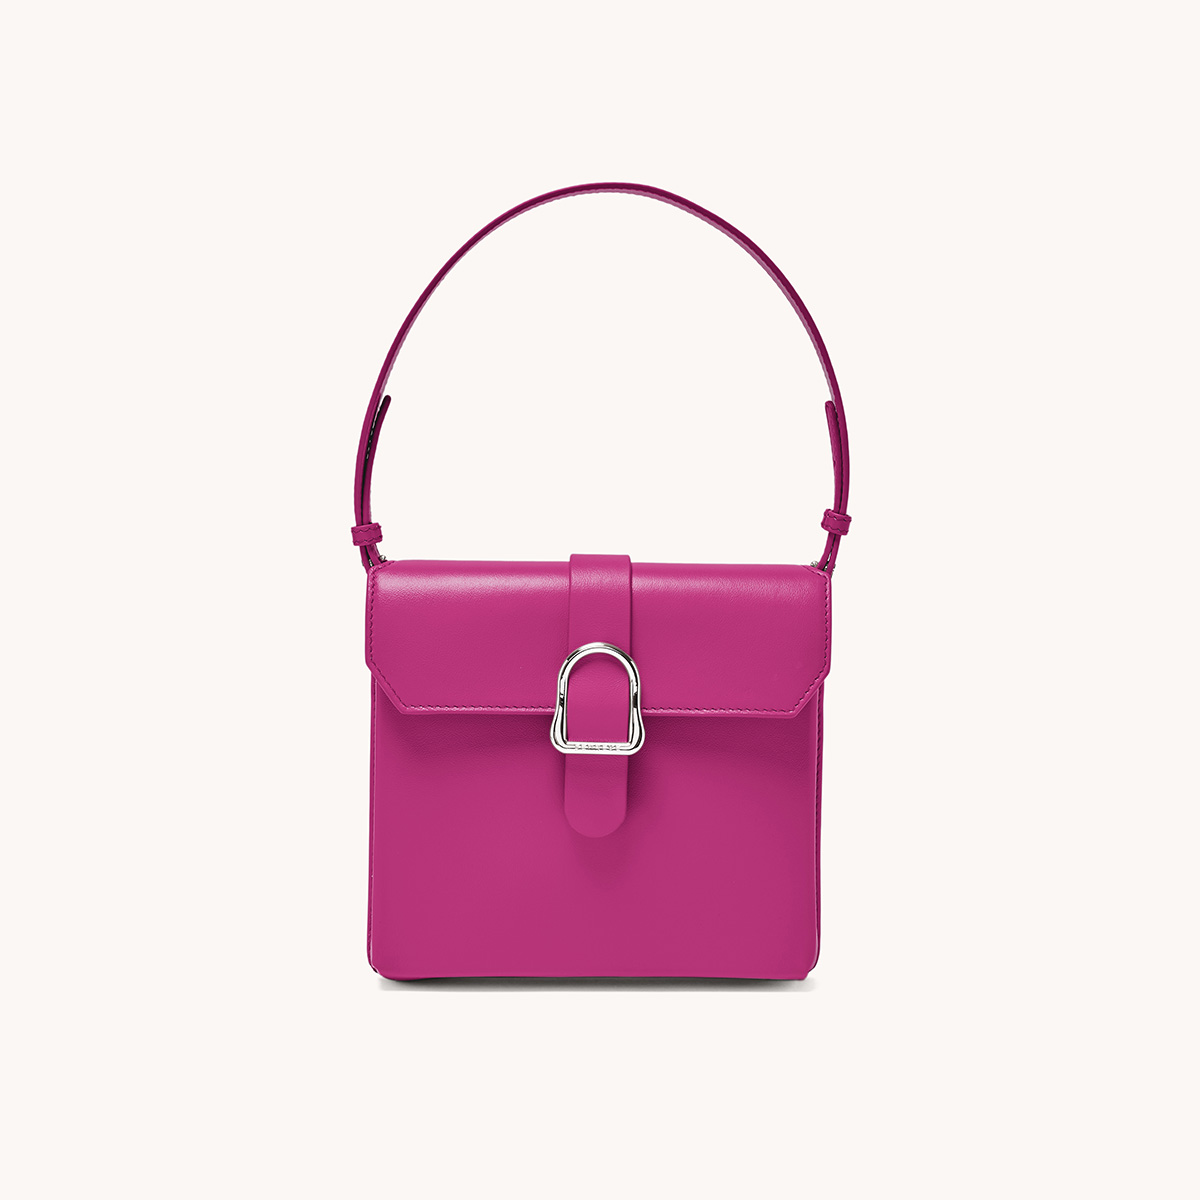 barbiecore pink leather square saddle bag front view